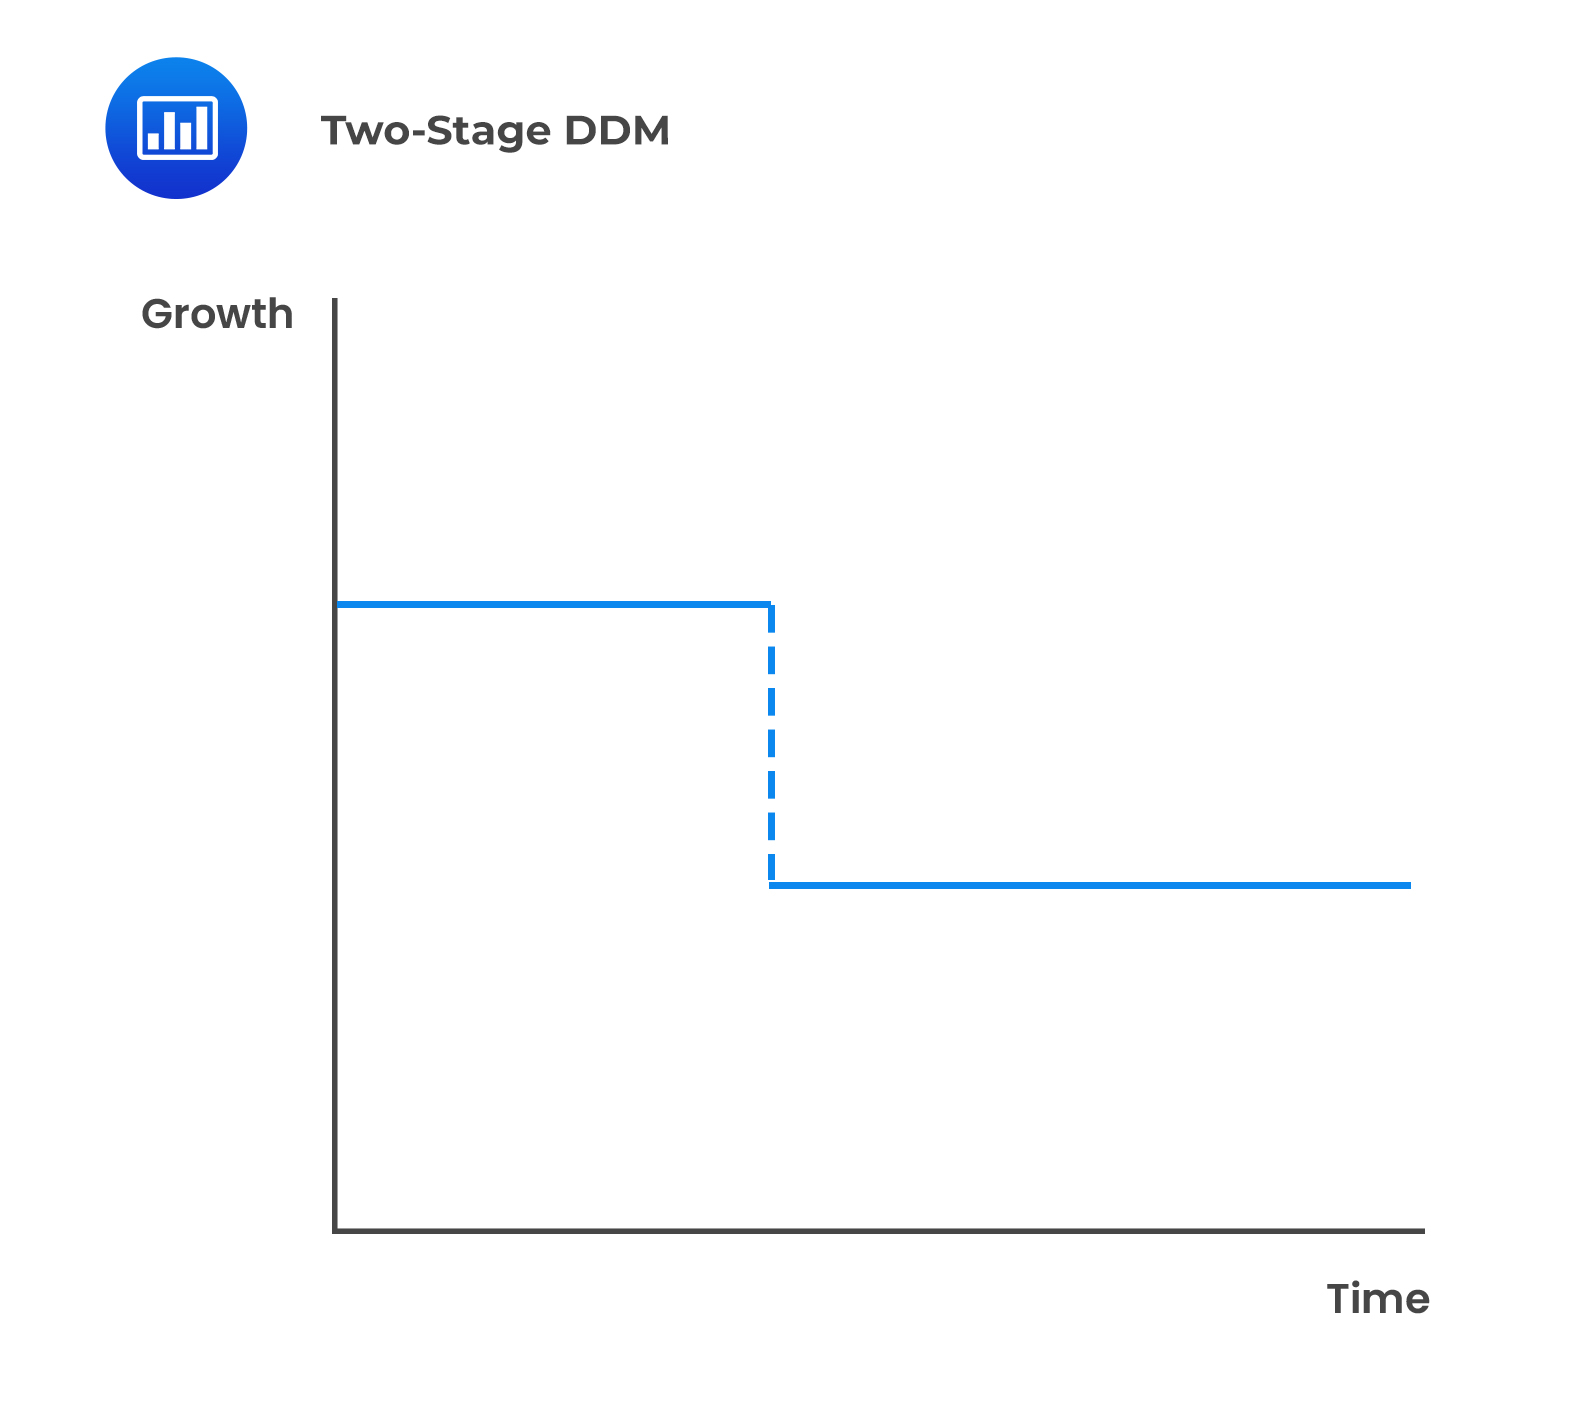 Two-Stage DDM